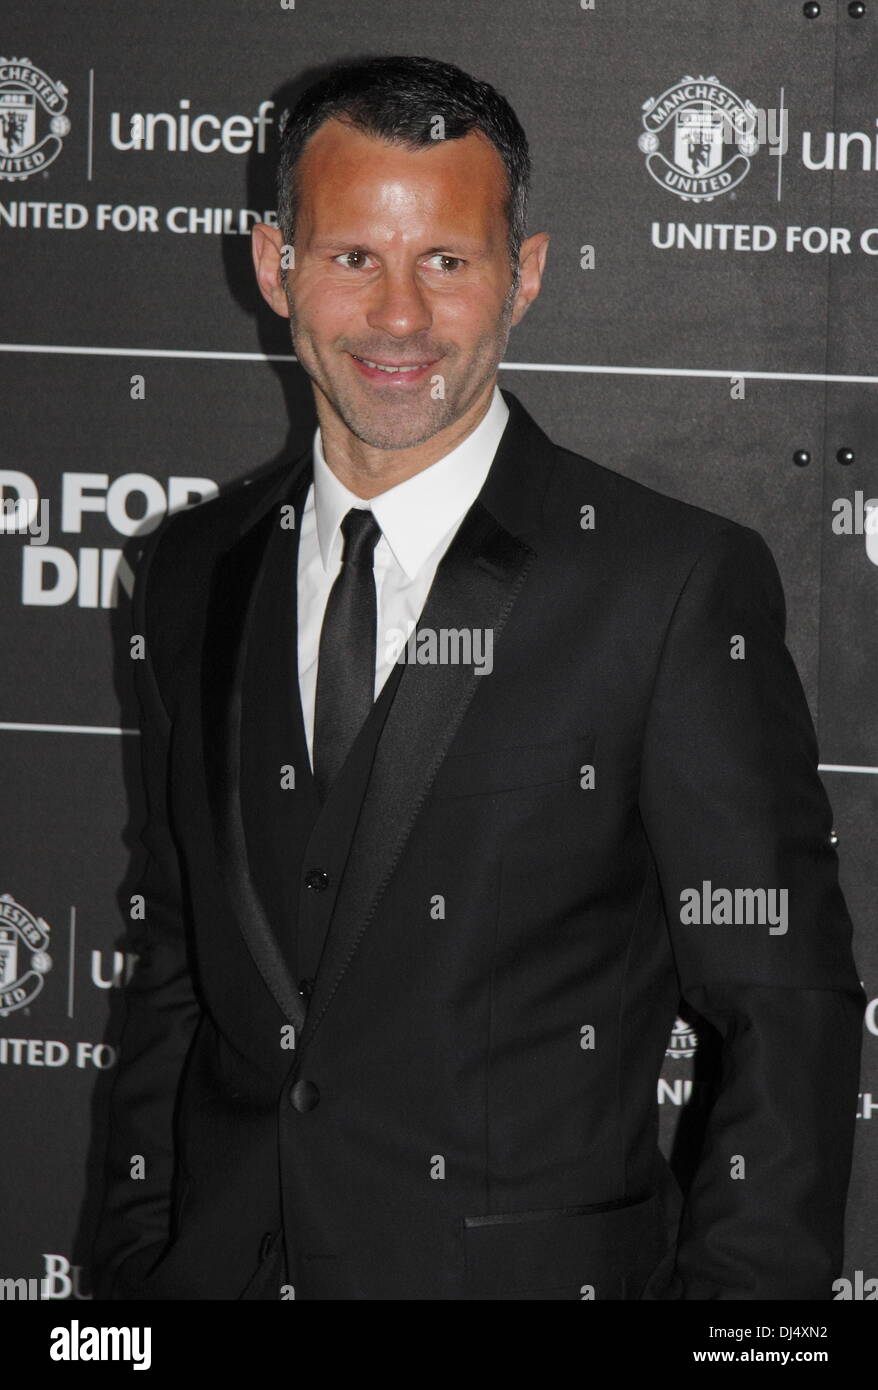 Old Trafford, Manchester, UK.  21 Nov 2013.  Ryan Giggs - Arrivals at the United for UNICEF Gala Dinner attended by the full Manchester United first-team and celebrities.  The dinner celebrated 14 years of the partnership between Manchester United and UNICEF, the worldÕs leading childrenÕs organisation, and raised over £200,000 for its work for vulnerable children around the world. Credit:  Deborah Vernon/Alamy Live News Stock Photo